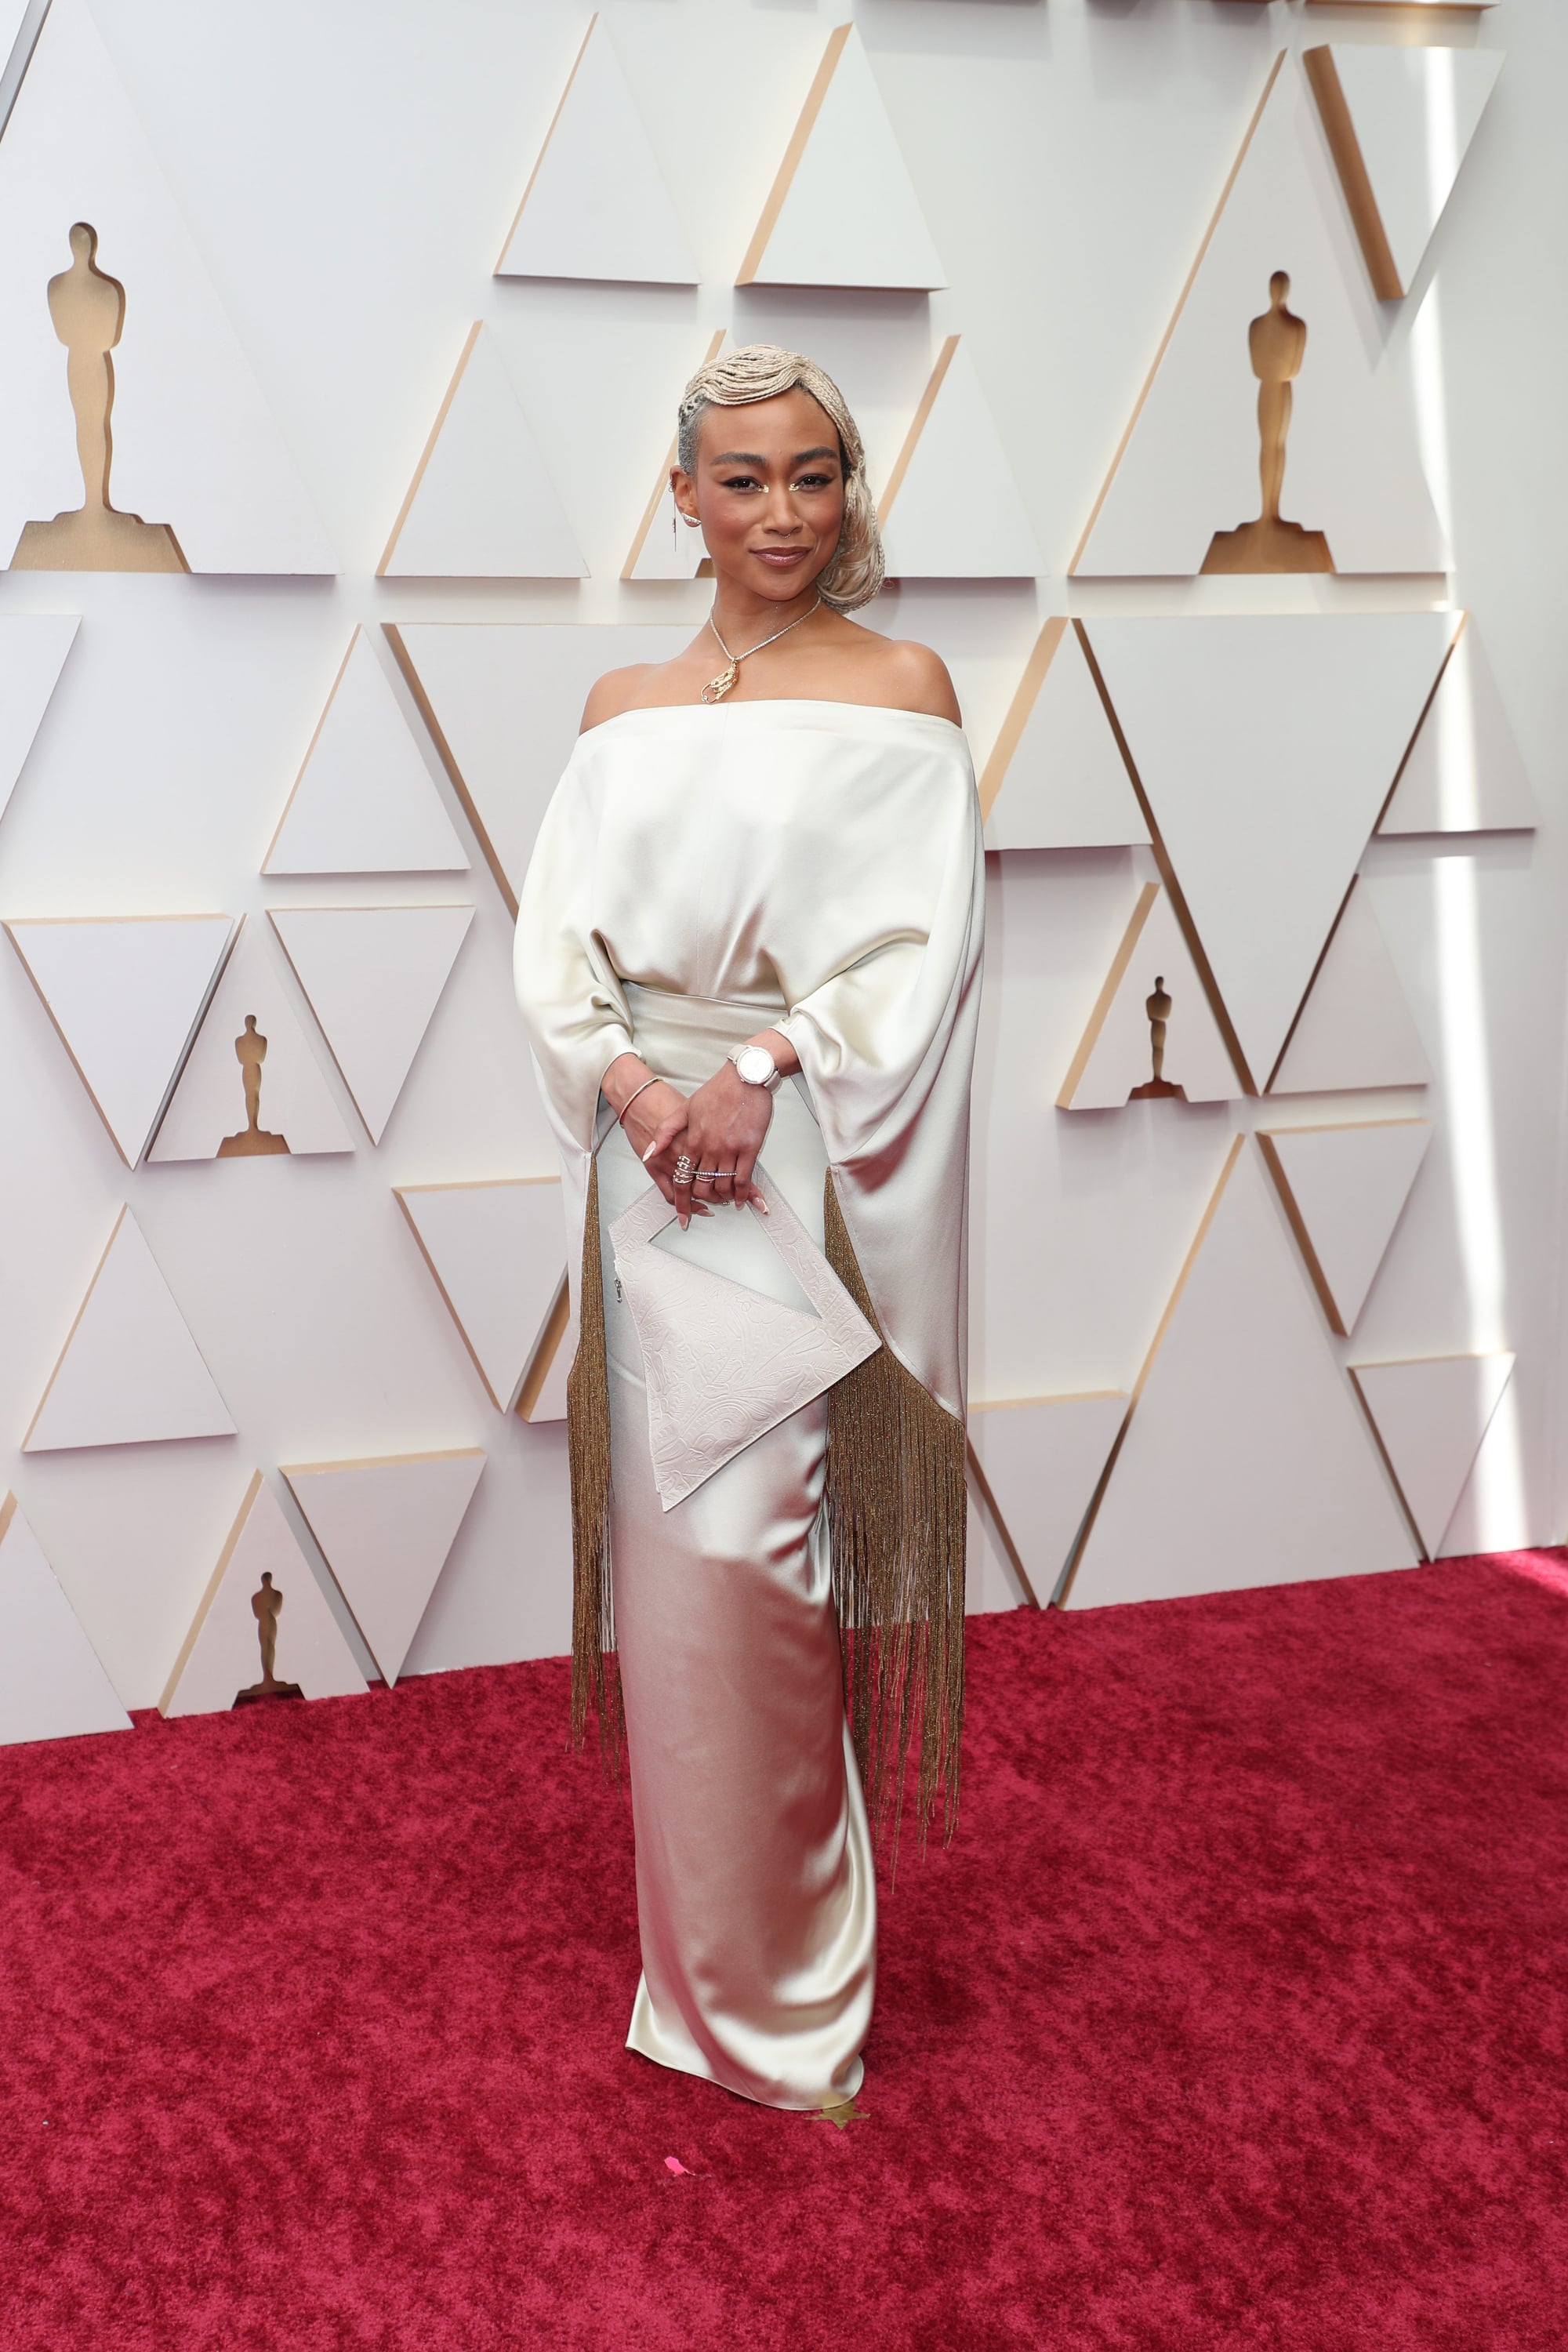 THE OSCARS® The 94th Oscars® aired live Sunday March 27, from the Dolby® Theatre at Ovation Hollywood at 8 p.m. EDT/5 p.m. PDT on ABC in more than 200 territories worldwide. (ABC via Getty Images)TATI GABRIELLE